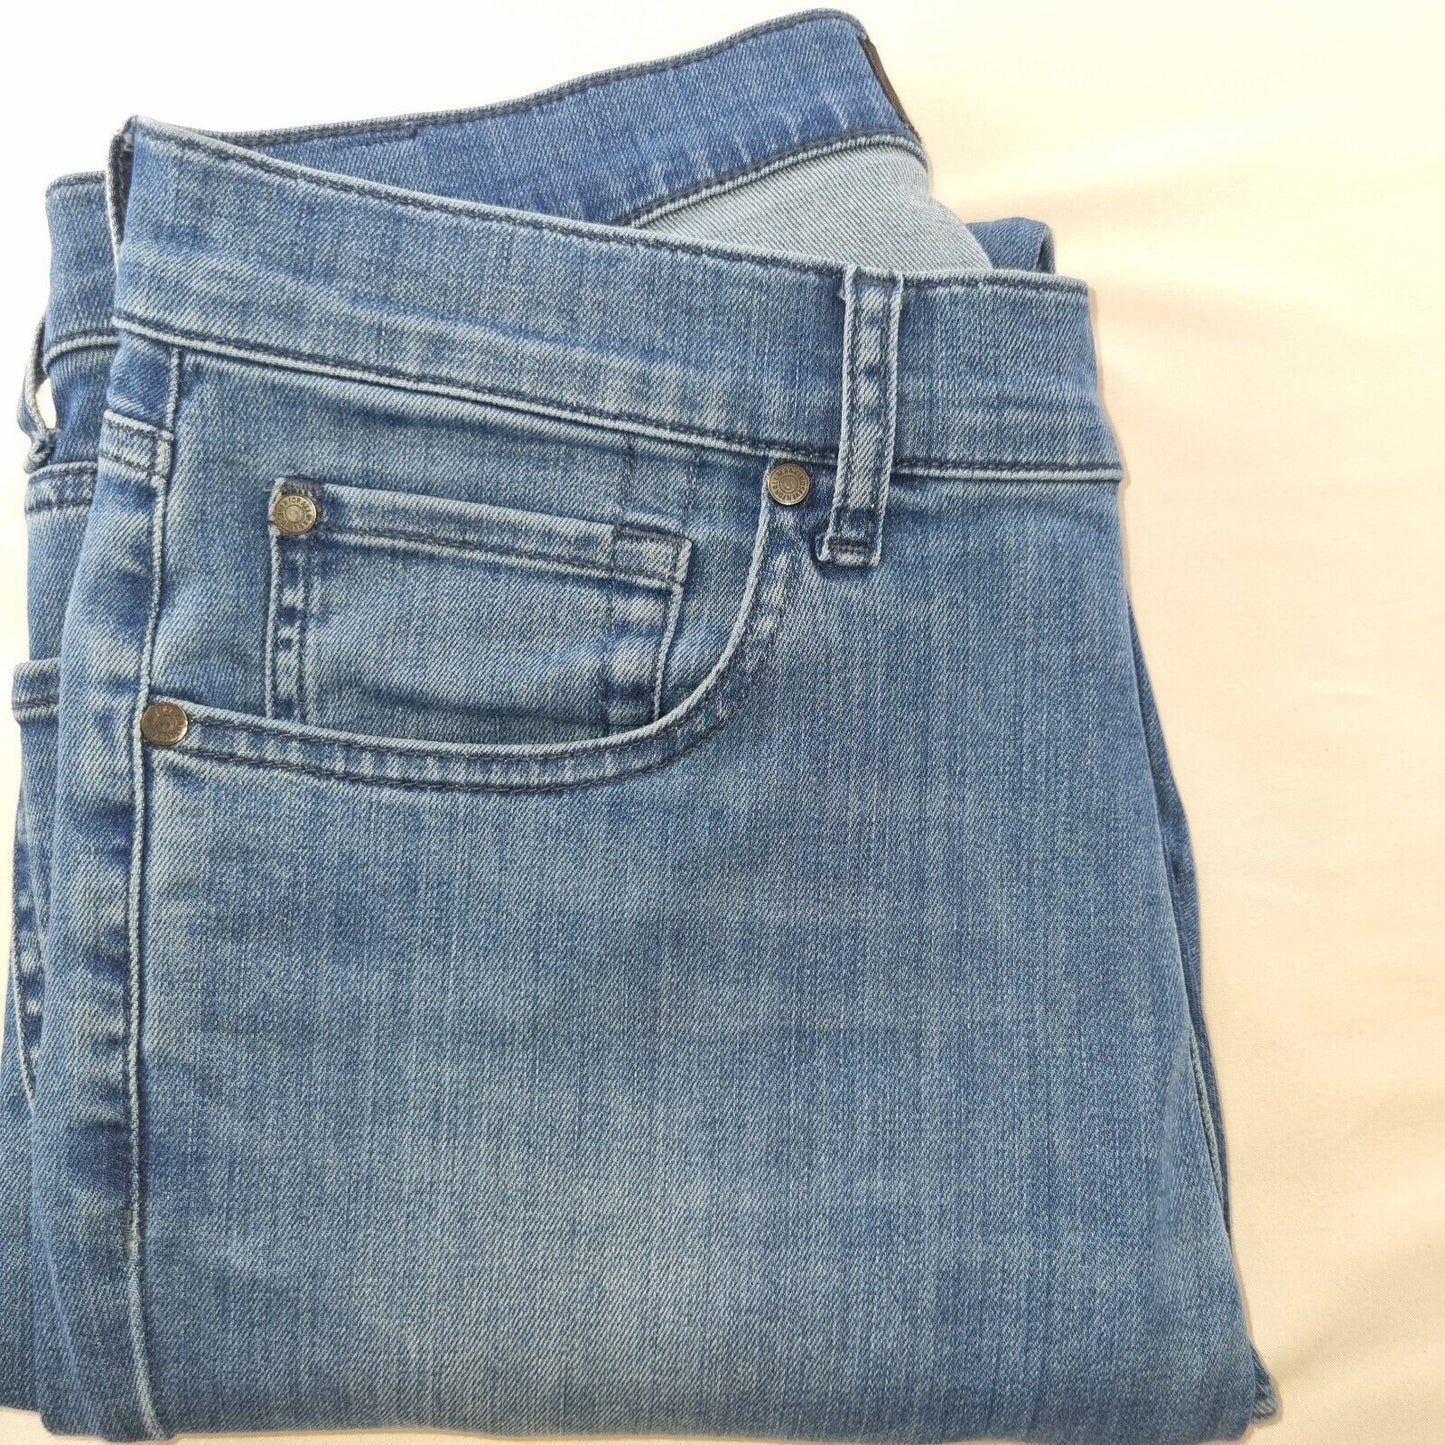 7 For All Mankind Mens Jeans Blue Cotton Straight Size 32 in L30 in Regular Butt - Bonnie Lassio